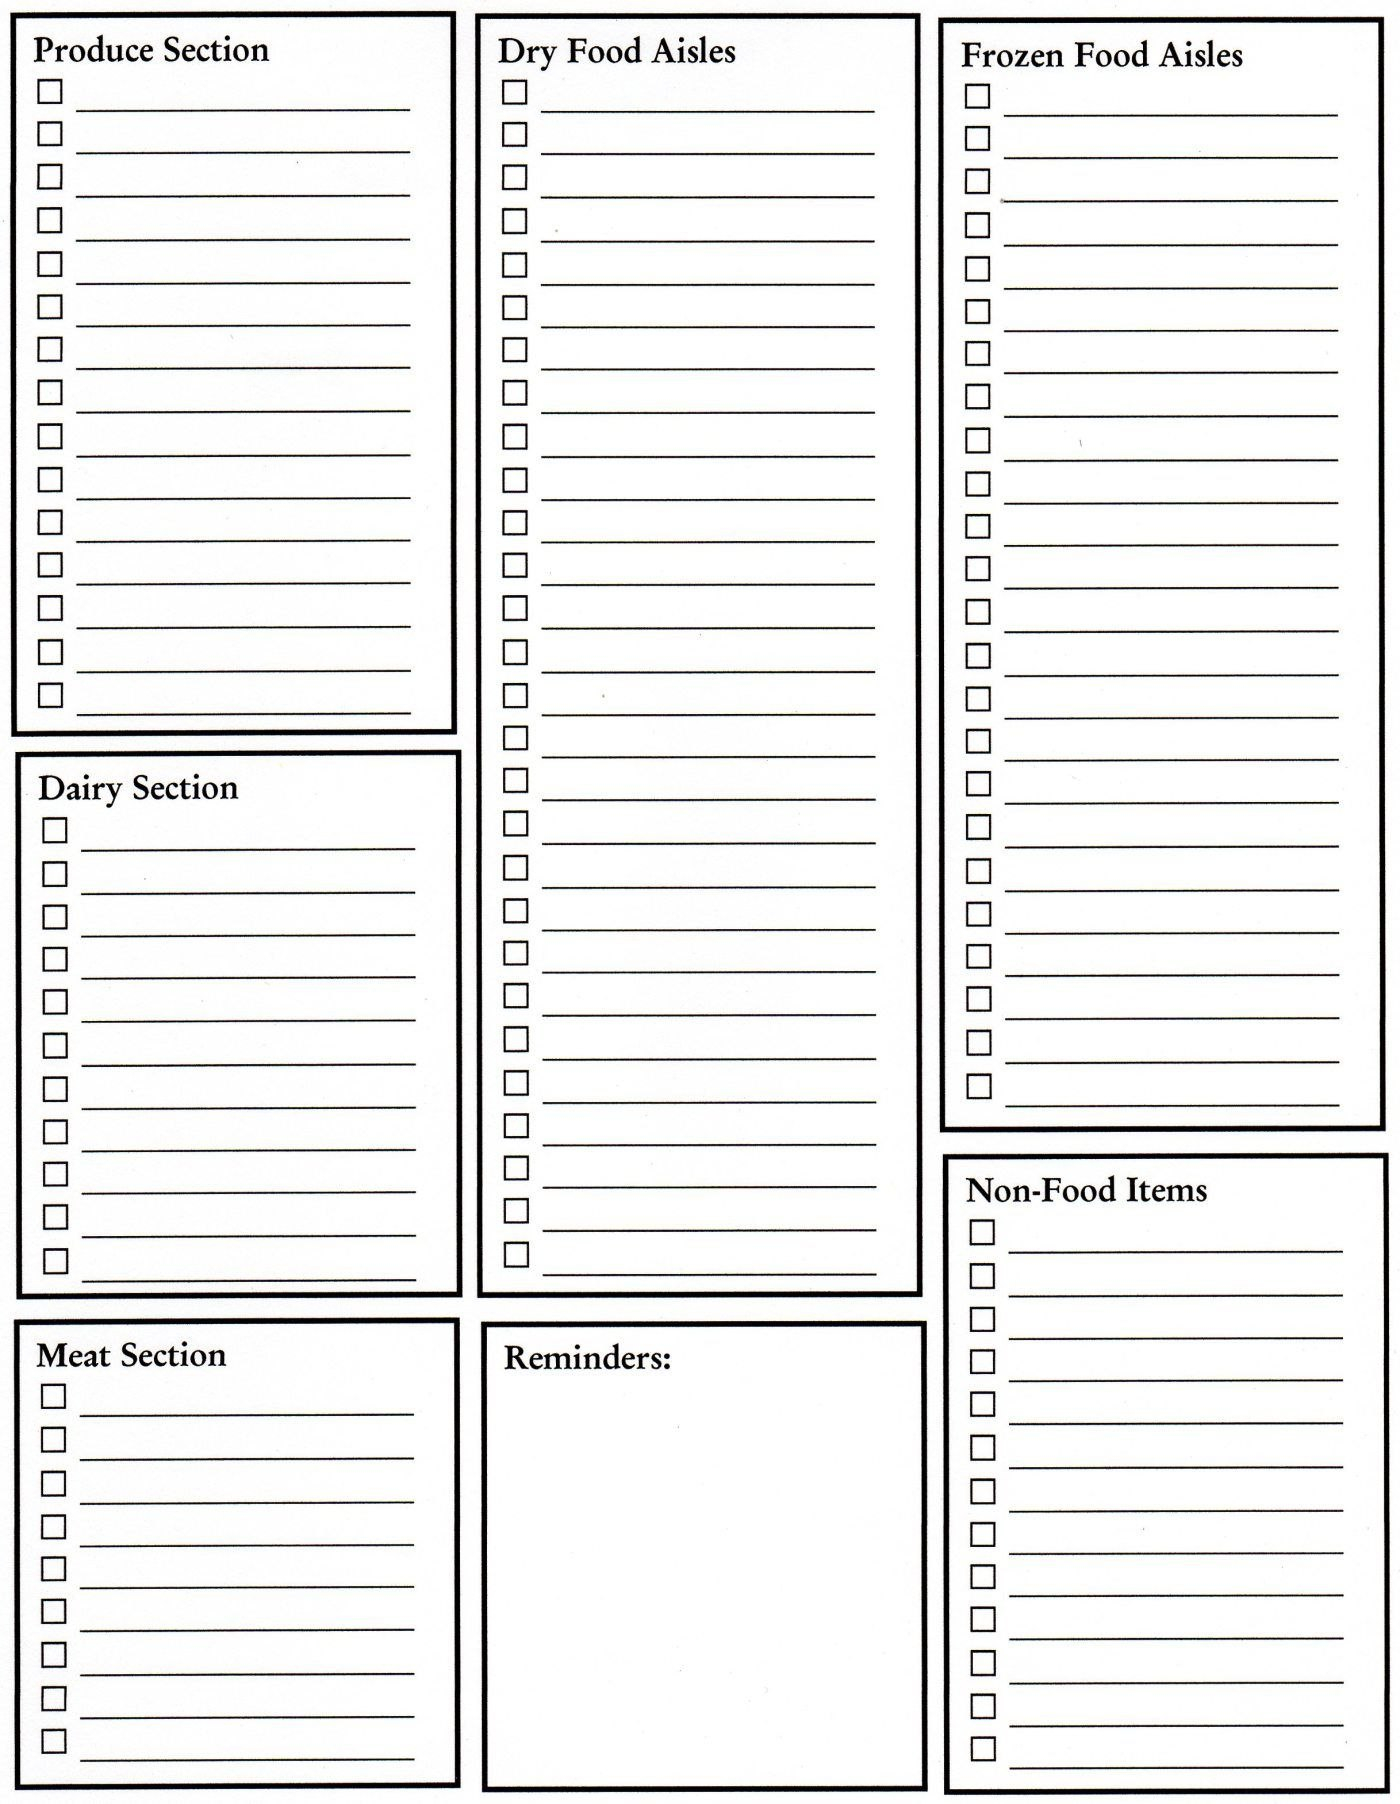 Grocery List Blank Template Great Idea Need To Keep On Refrigerator with Blank Grocery Shopping List Template